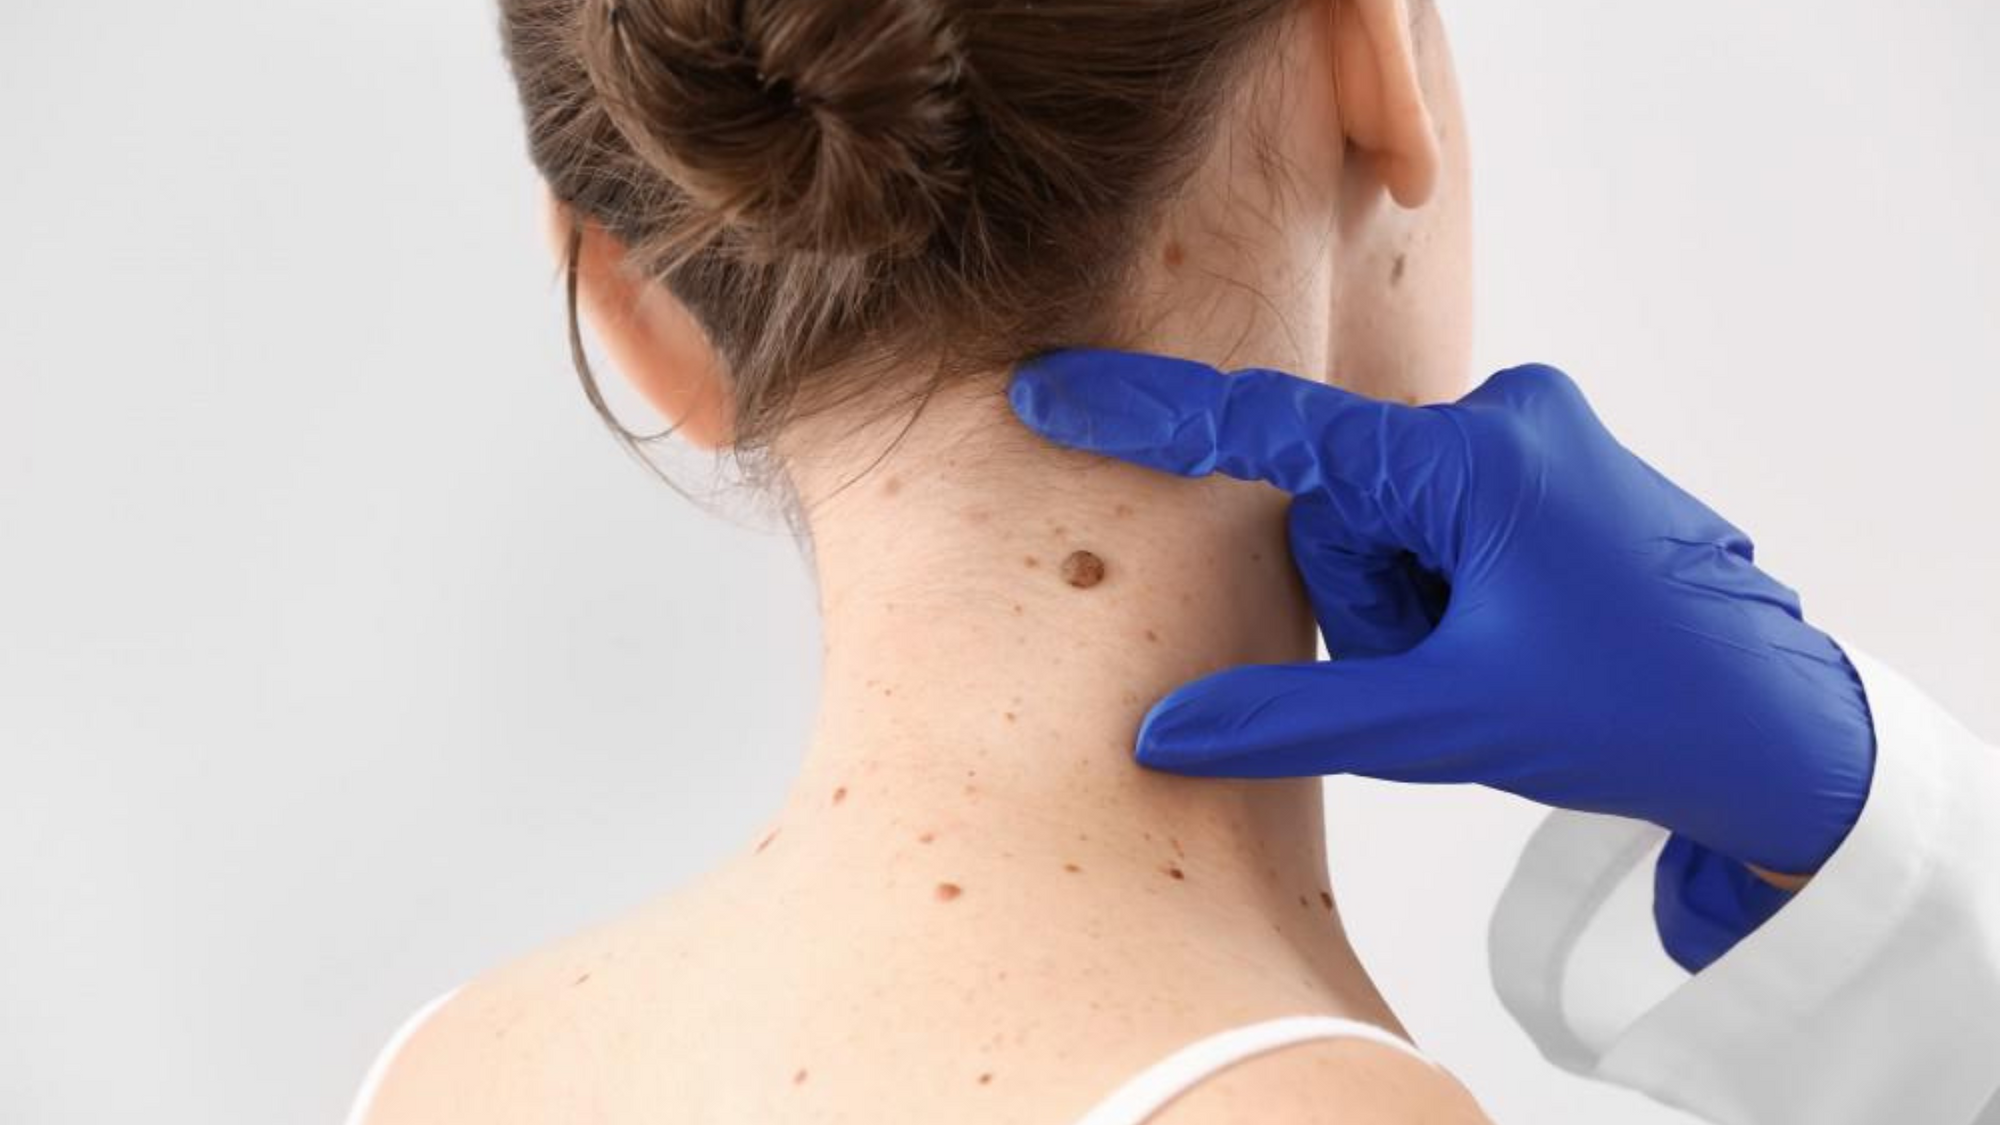 What to look out for: harmless mole or potential skin cancer?